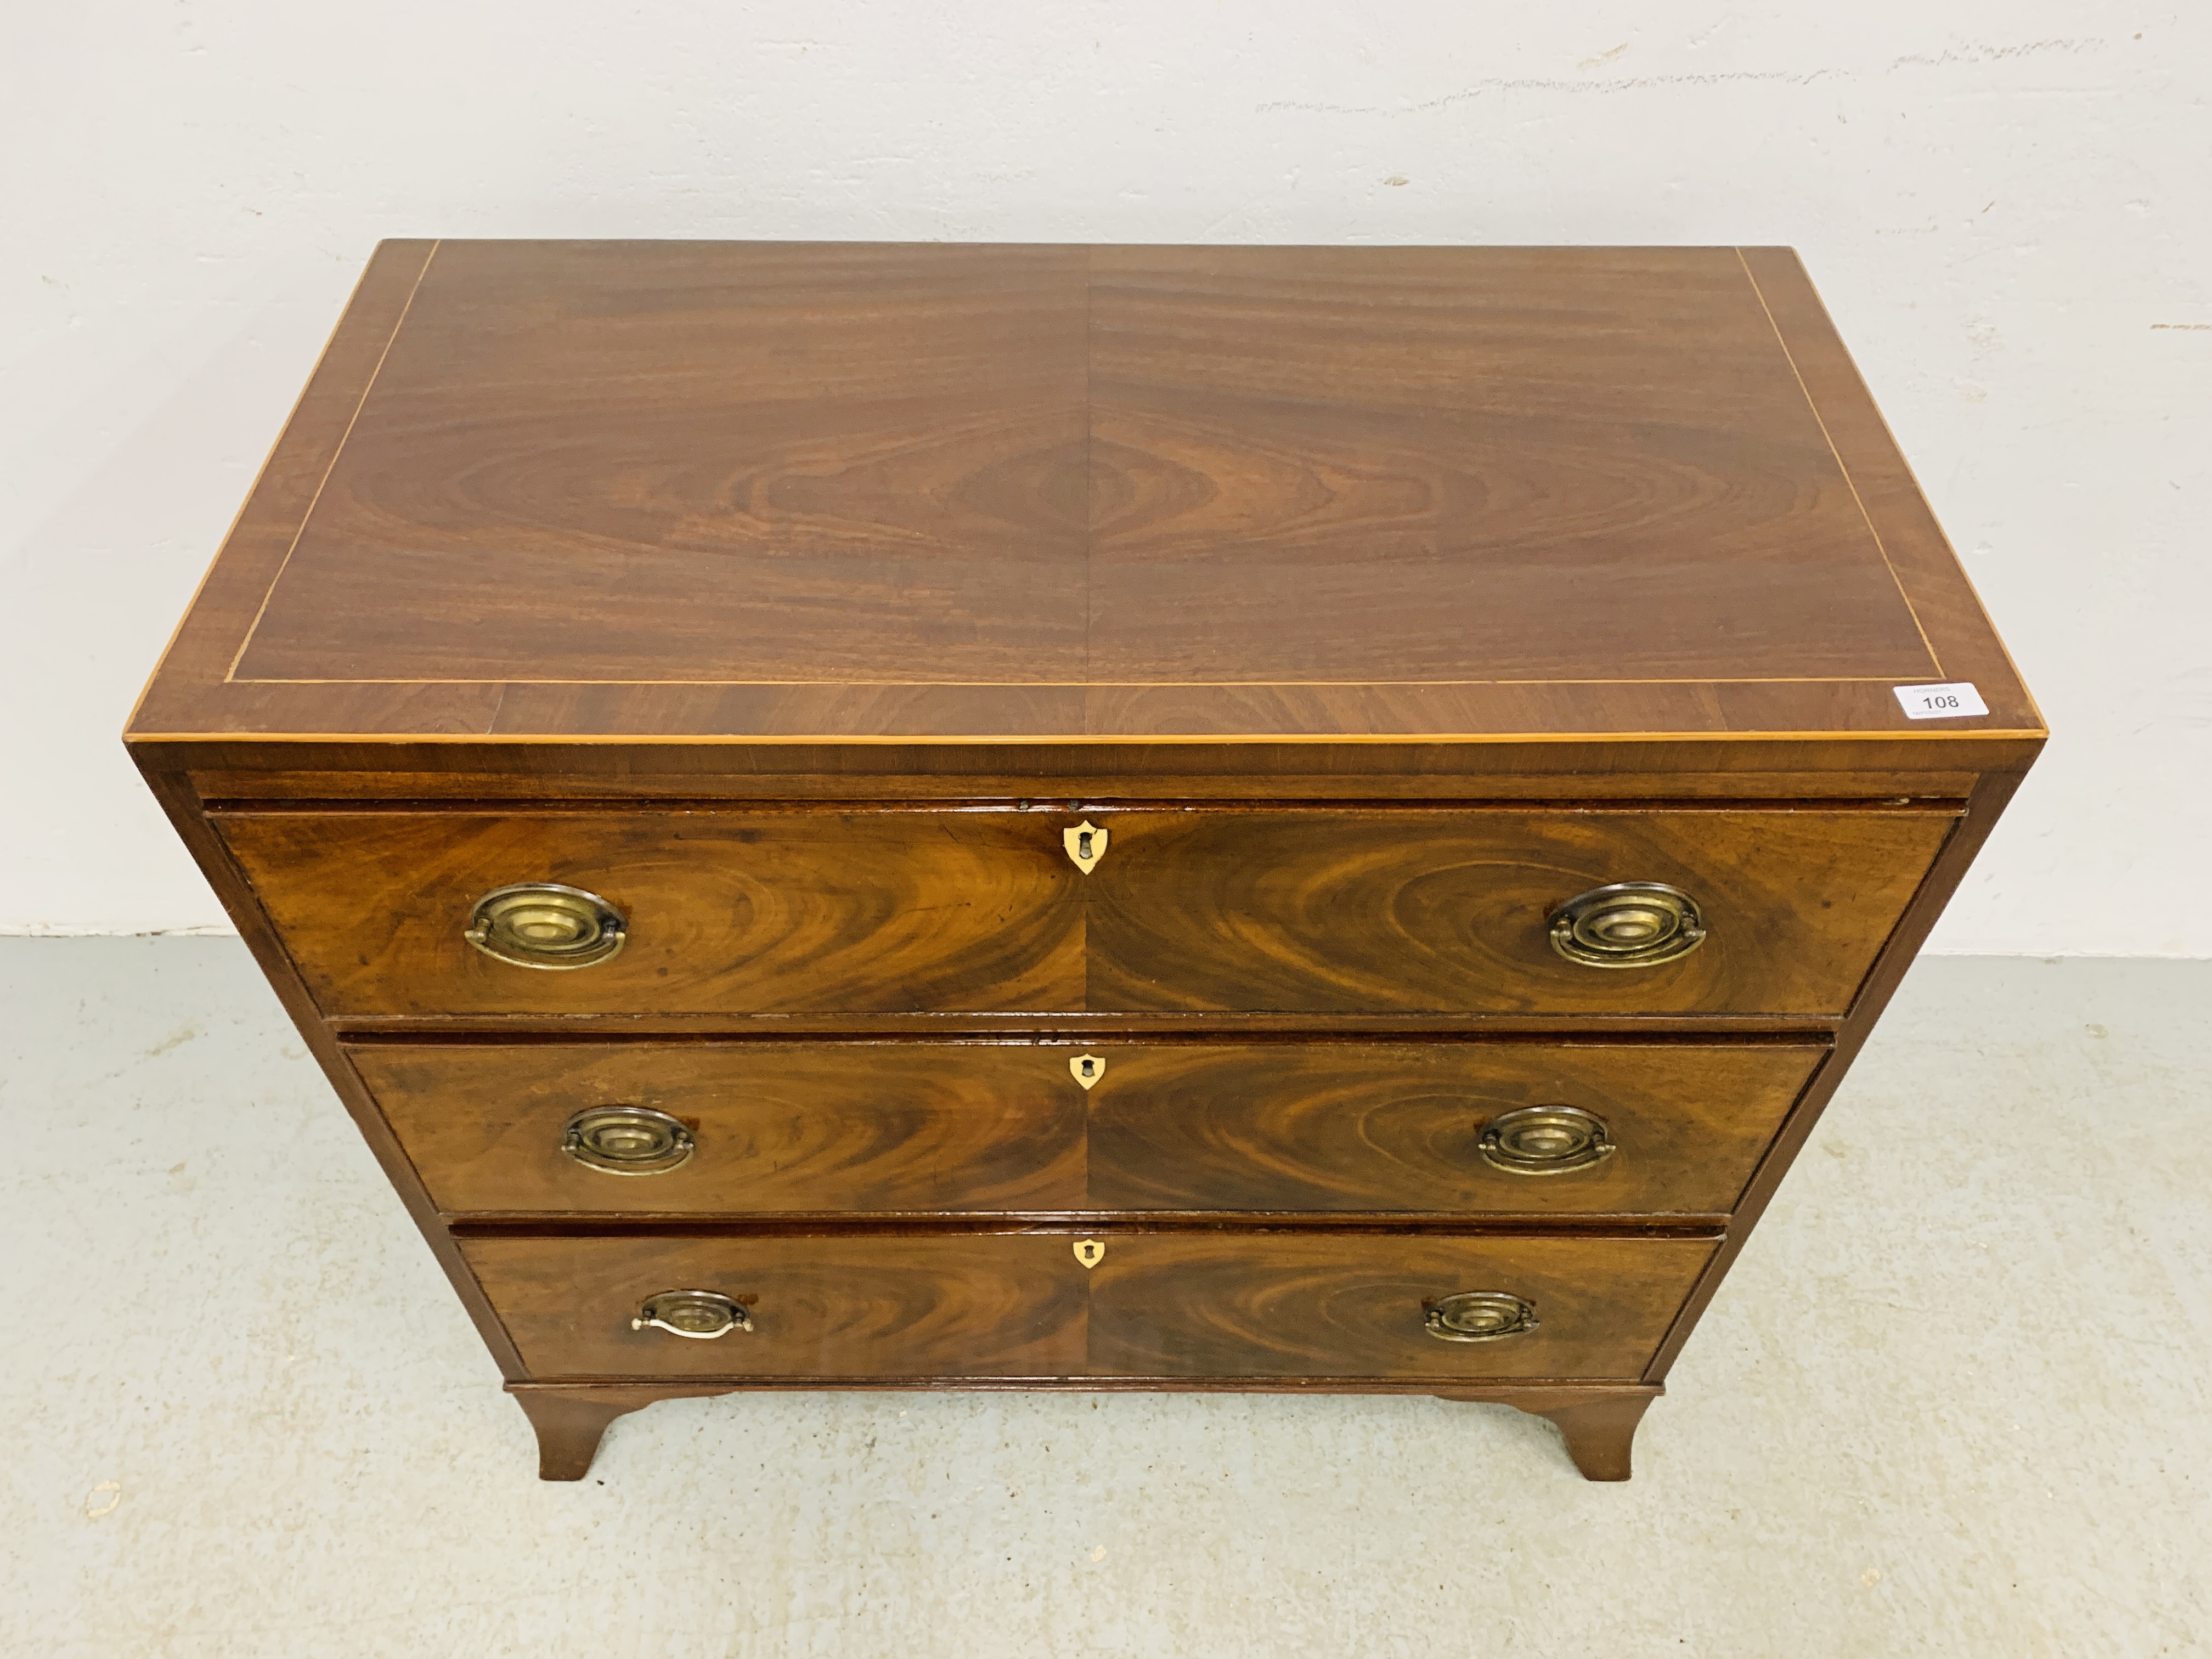 AN EARLY C19TH VINTAGE FLAME MAHOGANY 3 DRAWER CHEST, OVAL BRASS HANDLES ON SPLAYED LEGS - W 89CM. - Image 2 of 10